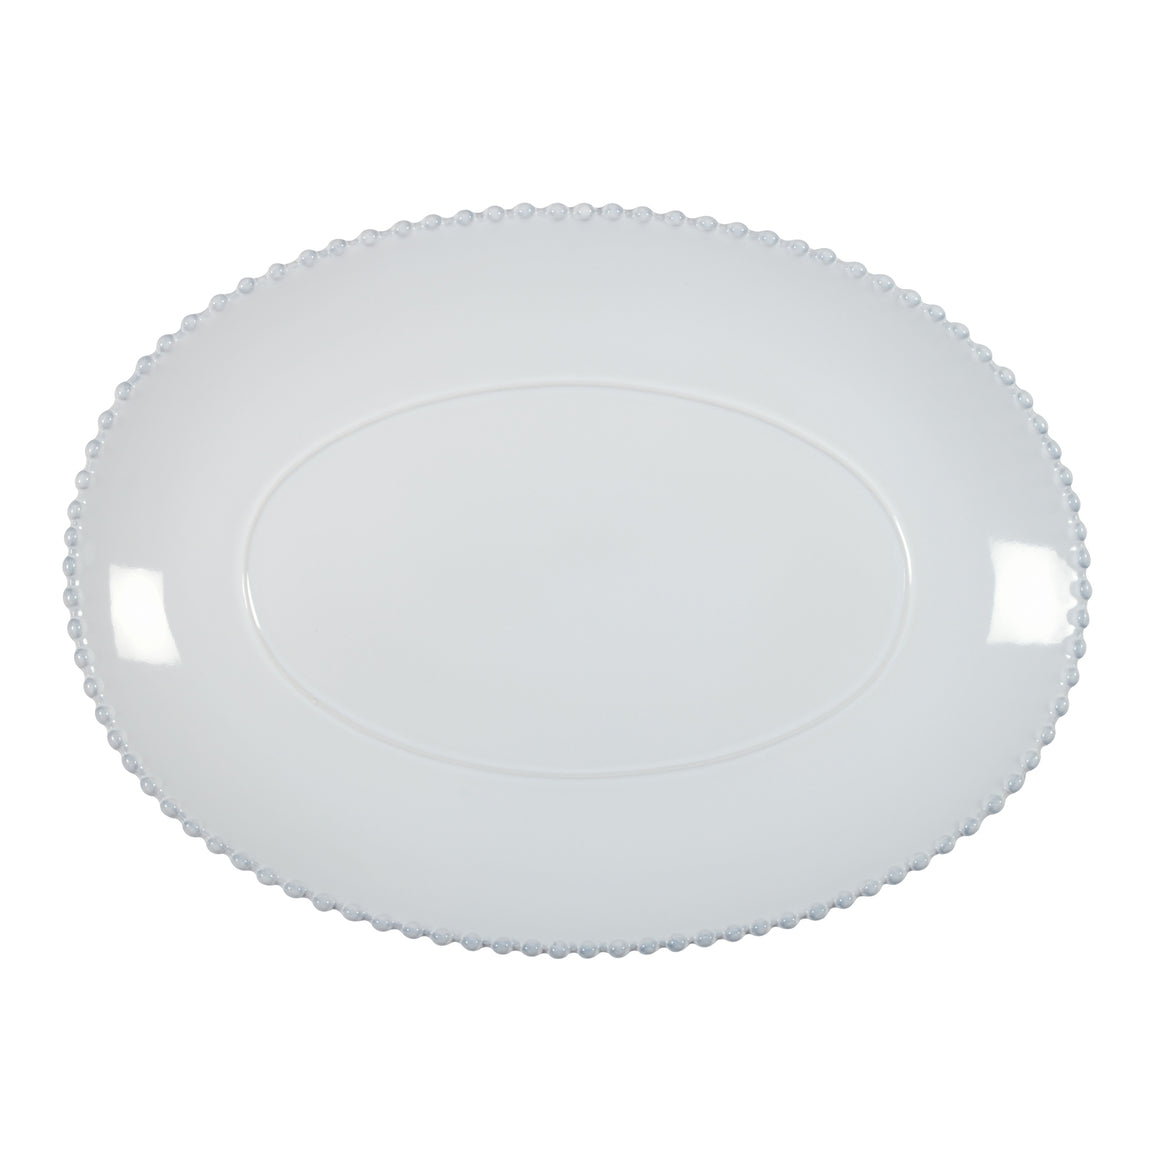 Pearl White Large Oval Platter